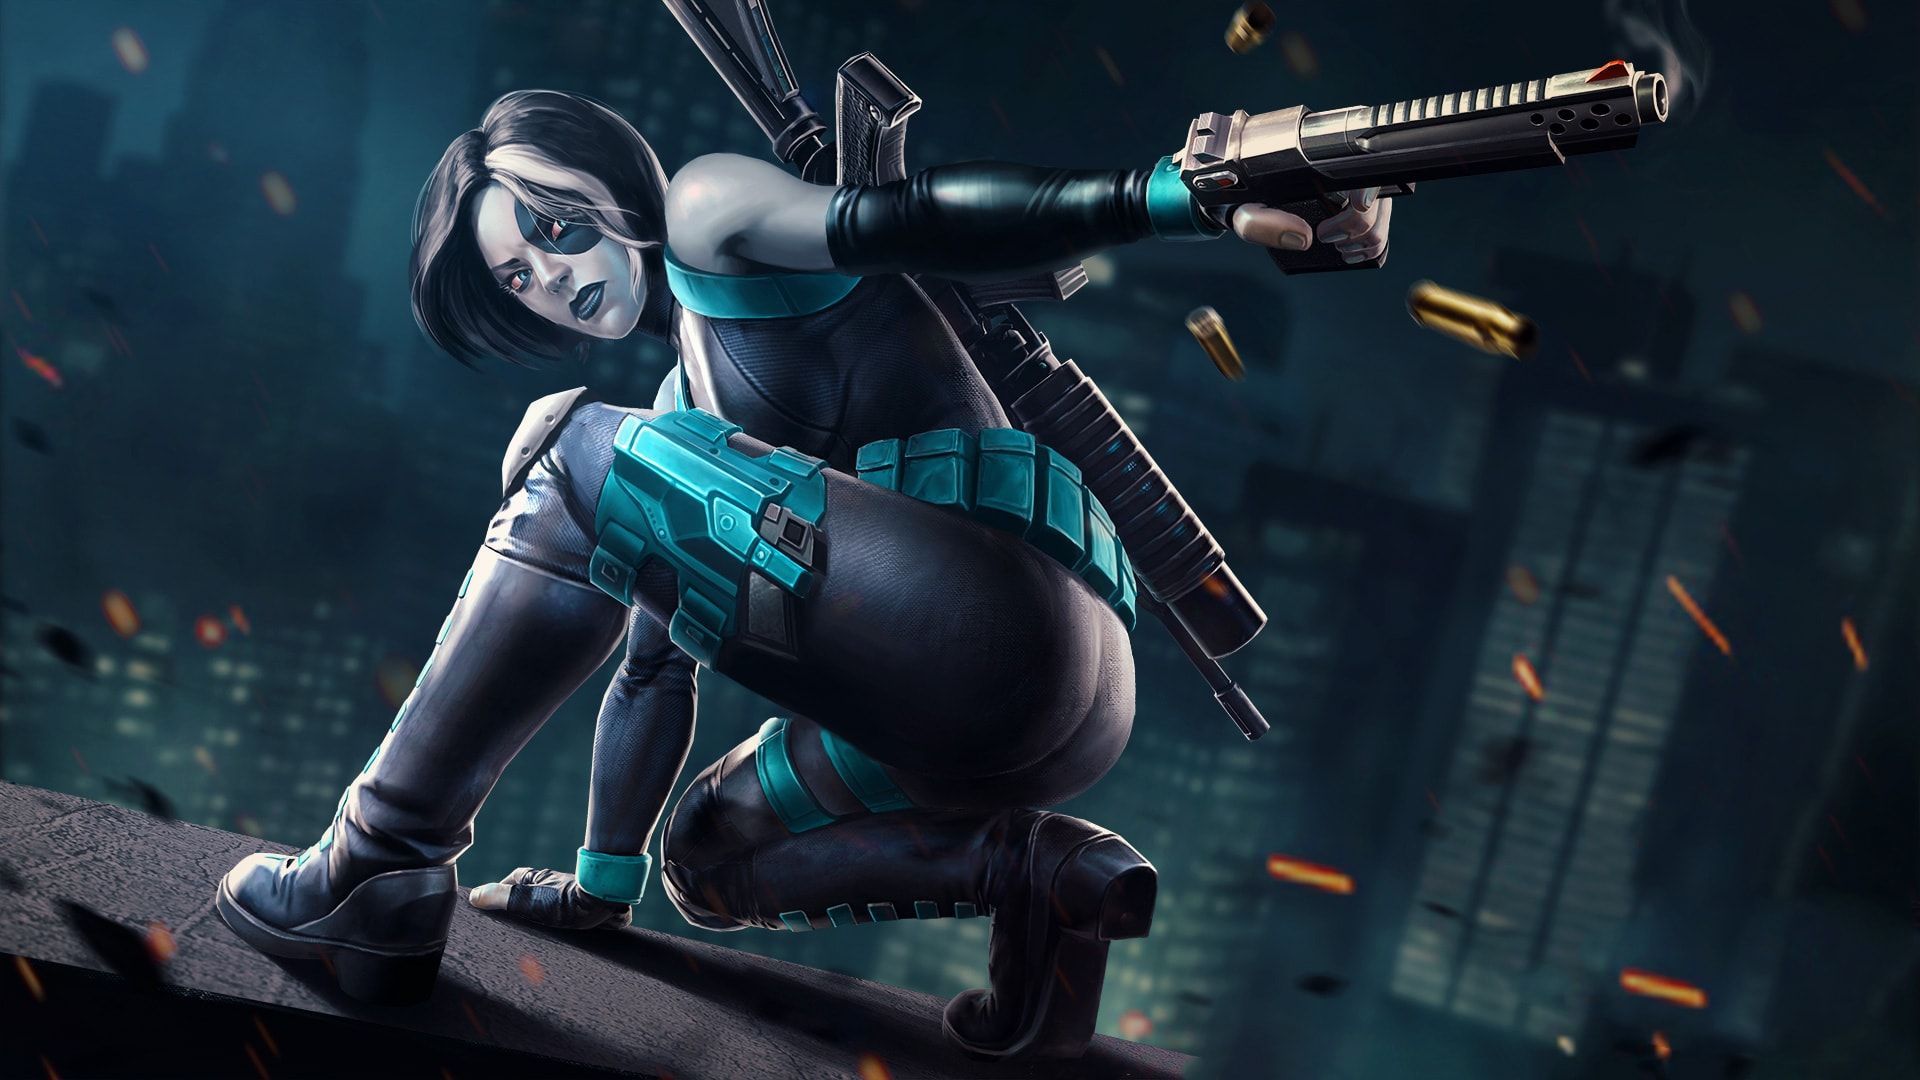 Domino Contest Champions Domino Contest Champions is an HD desktop wallpaper posted in our free image col. Domino marvel, Marvel champions, Contest of champions